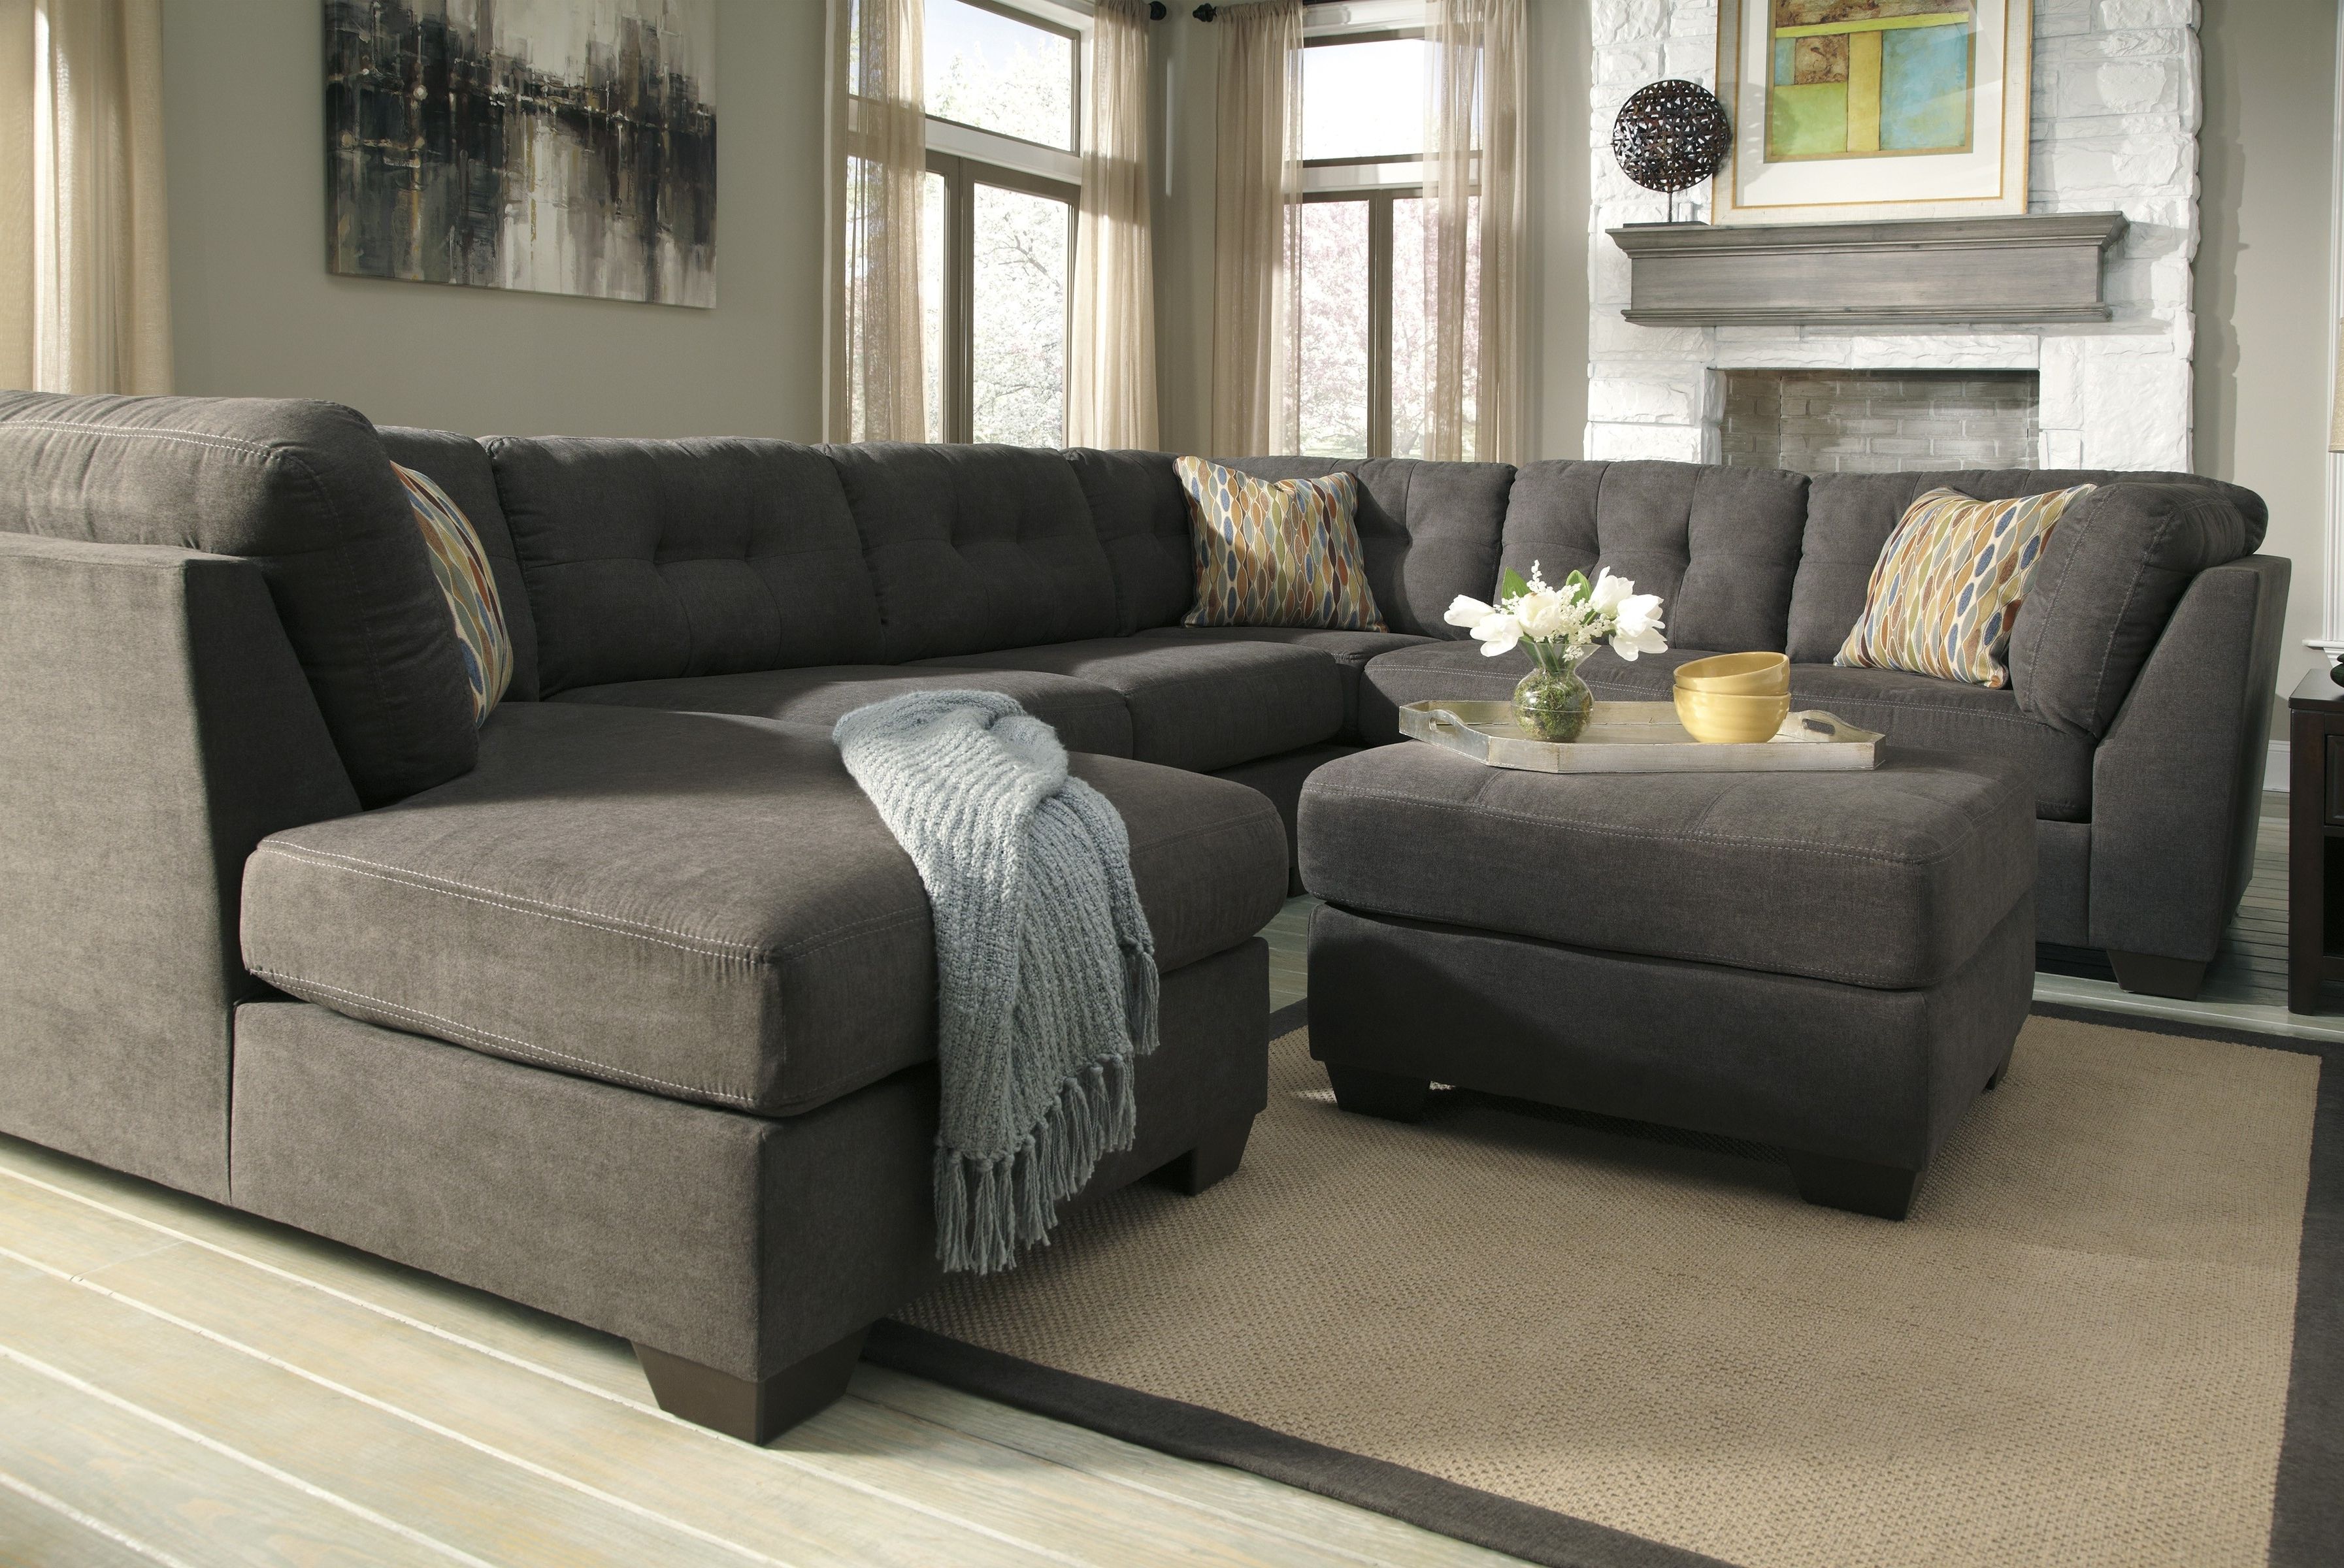 Favorite Tufted Sectionals With Chaise With Regard To Decorations Inspiration Lovable Grey Velvet U Shaped Tufted (View 15 of 15)